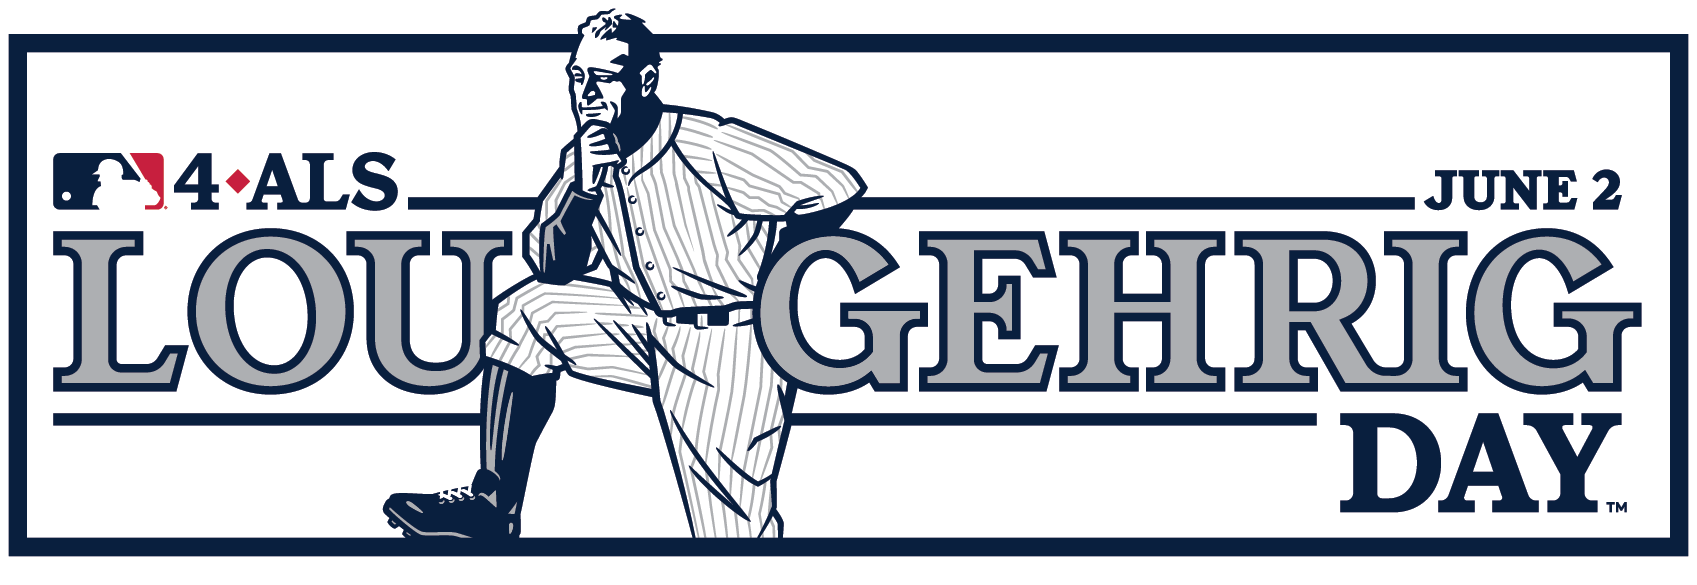 Honoring Lou Gehrig Day with the Chicago Cubs